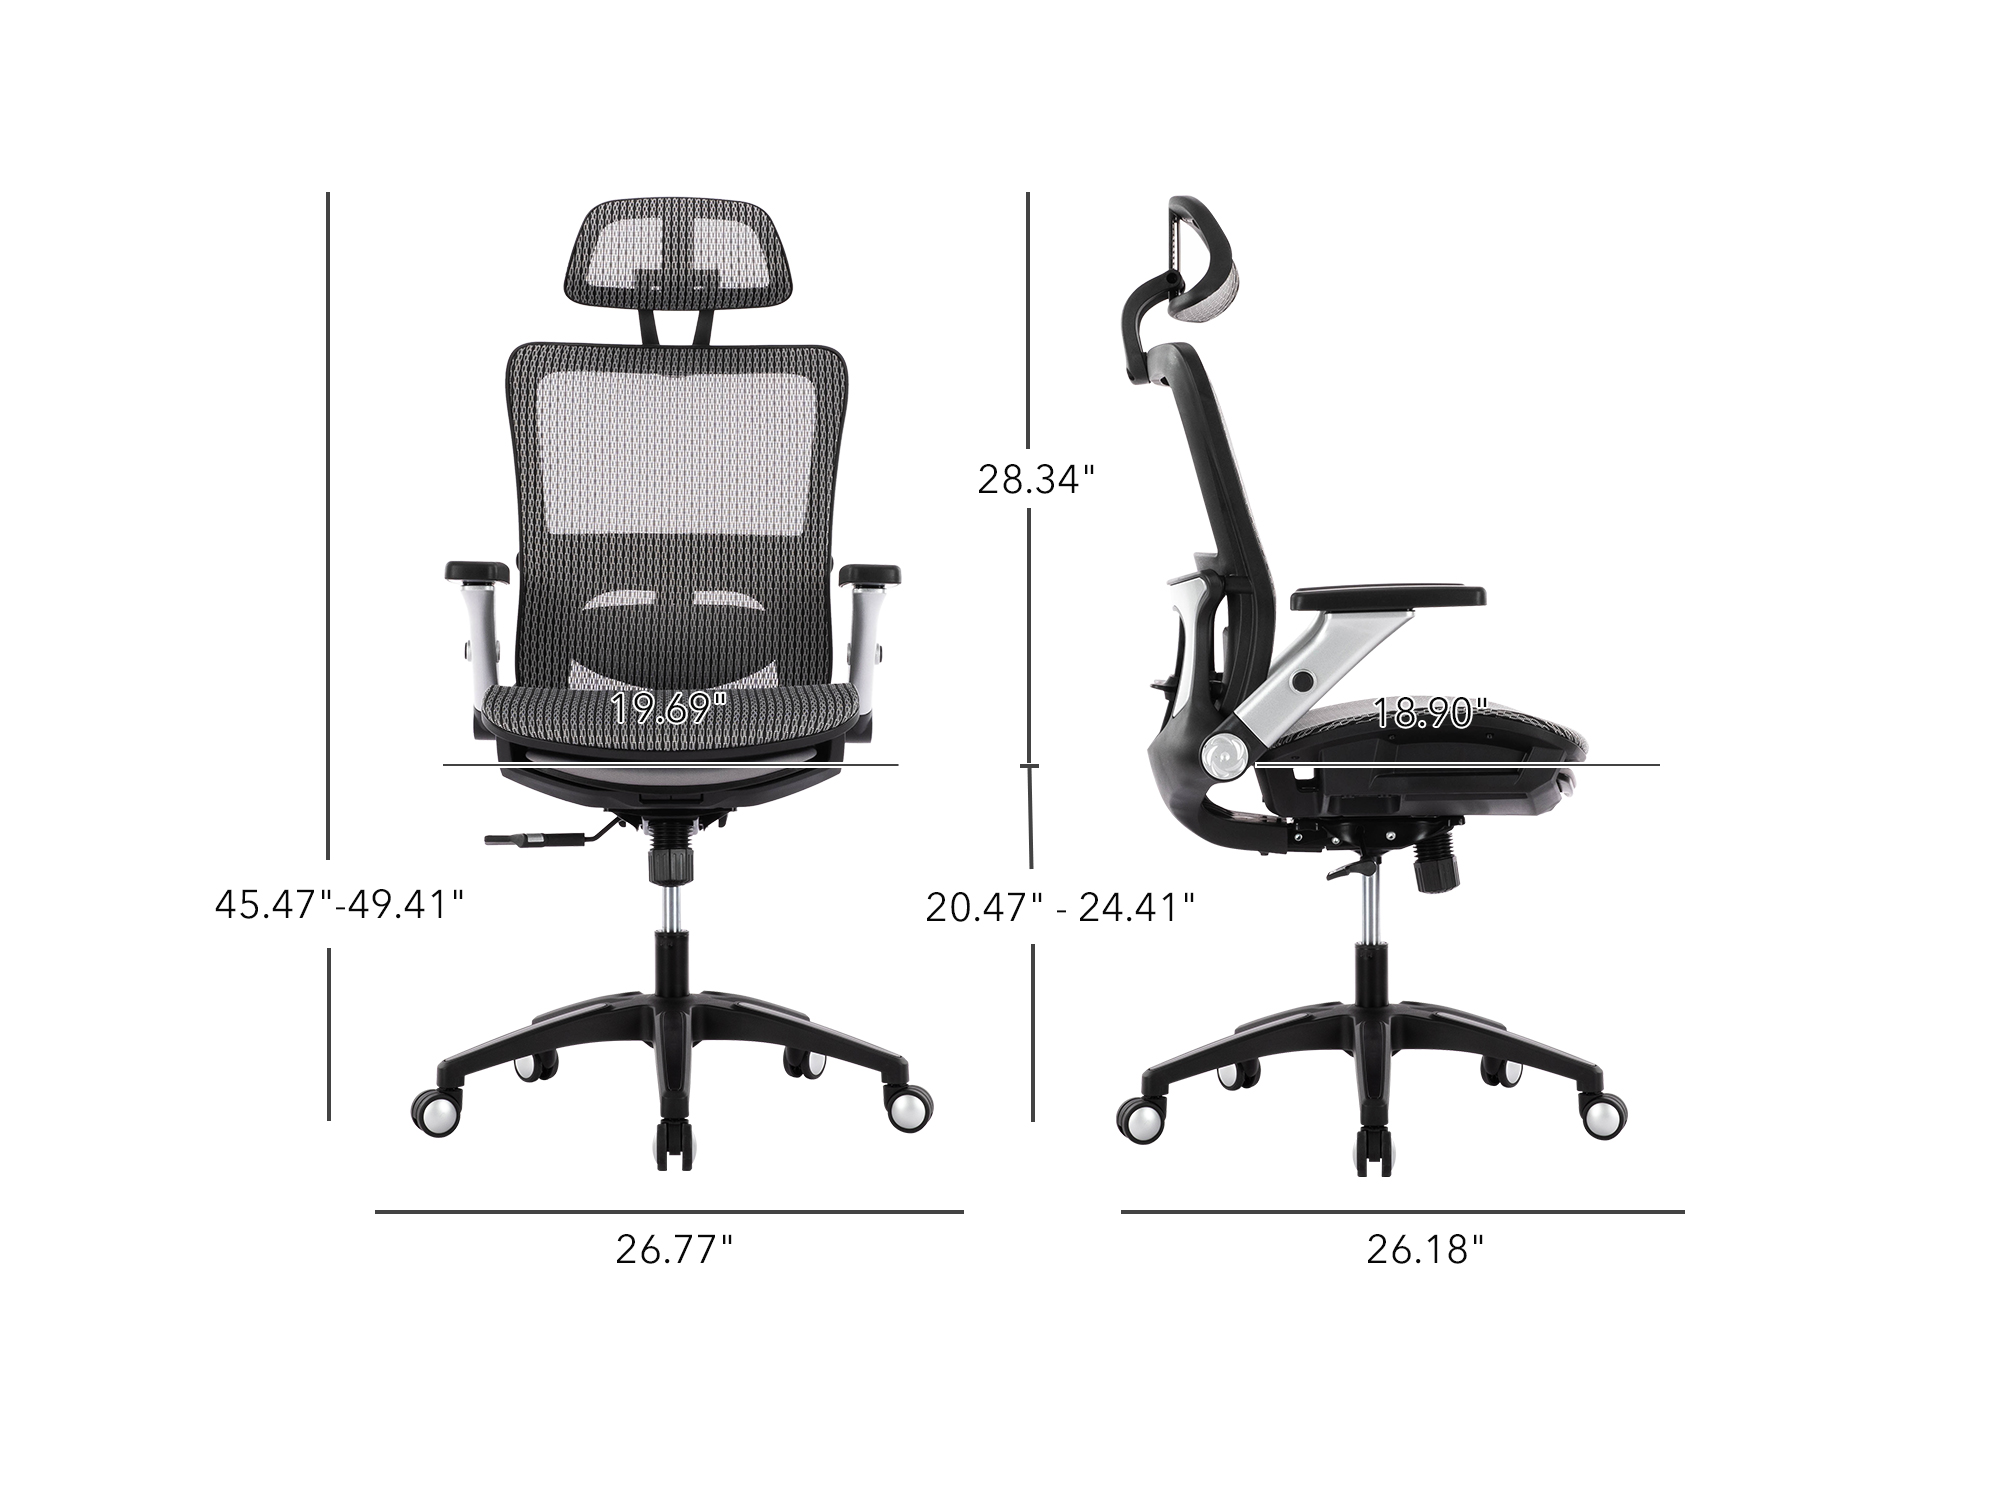 COLAMY Ergonomic Mesh Office Chair with Footrest - High Back Computer Desk  Chair with Headrest, 4D Flip-up Armrests, Adjustable Tilt Lock, and Lumbar